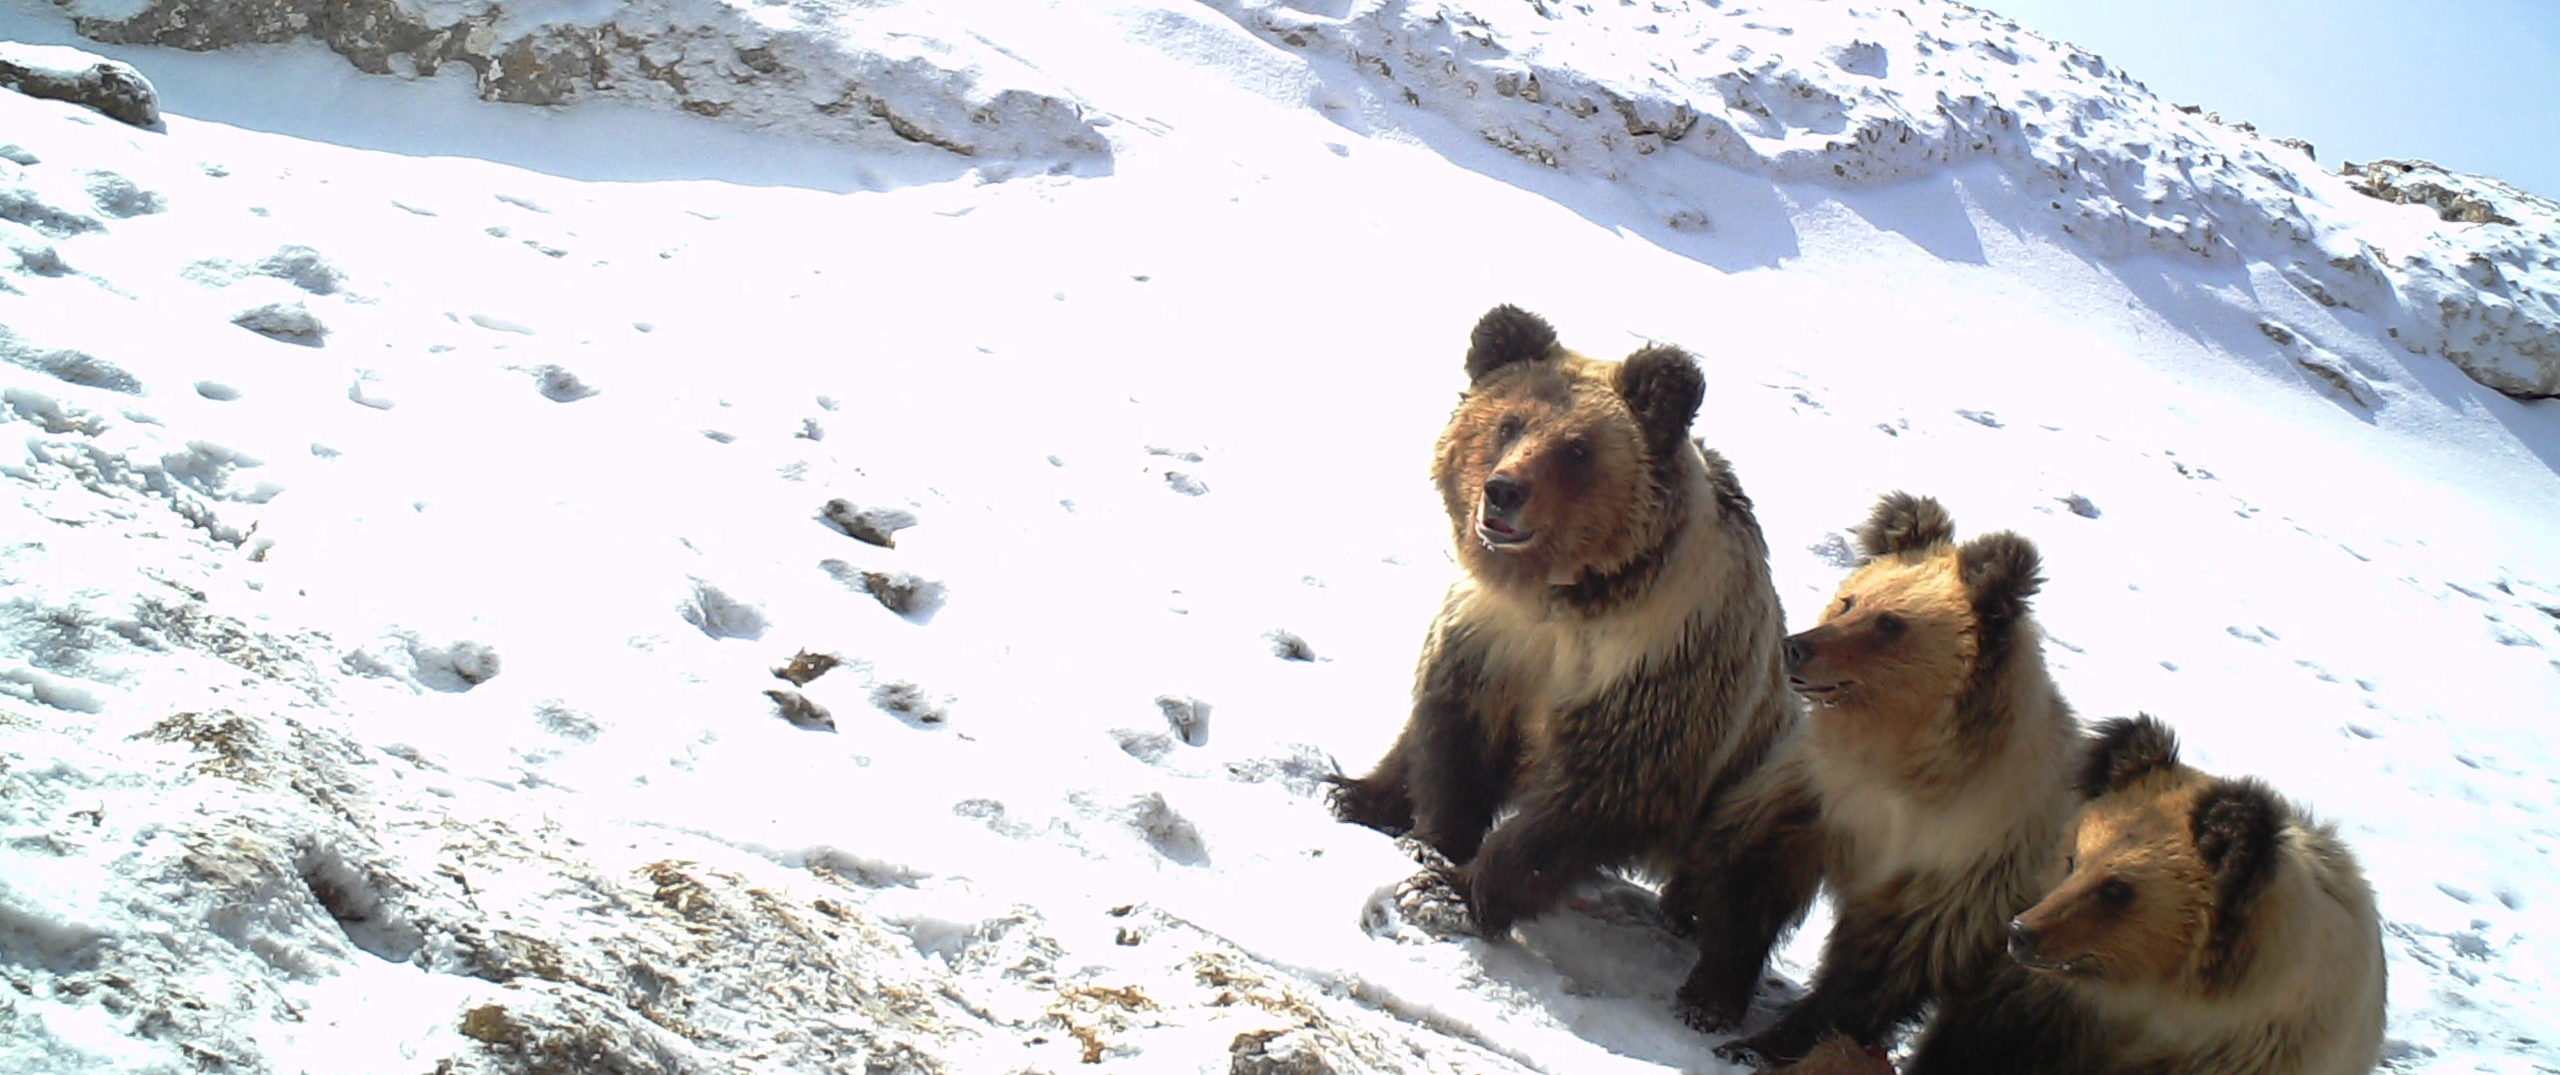 Snow leopard & Tibetan brown bear conservation and research